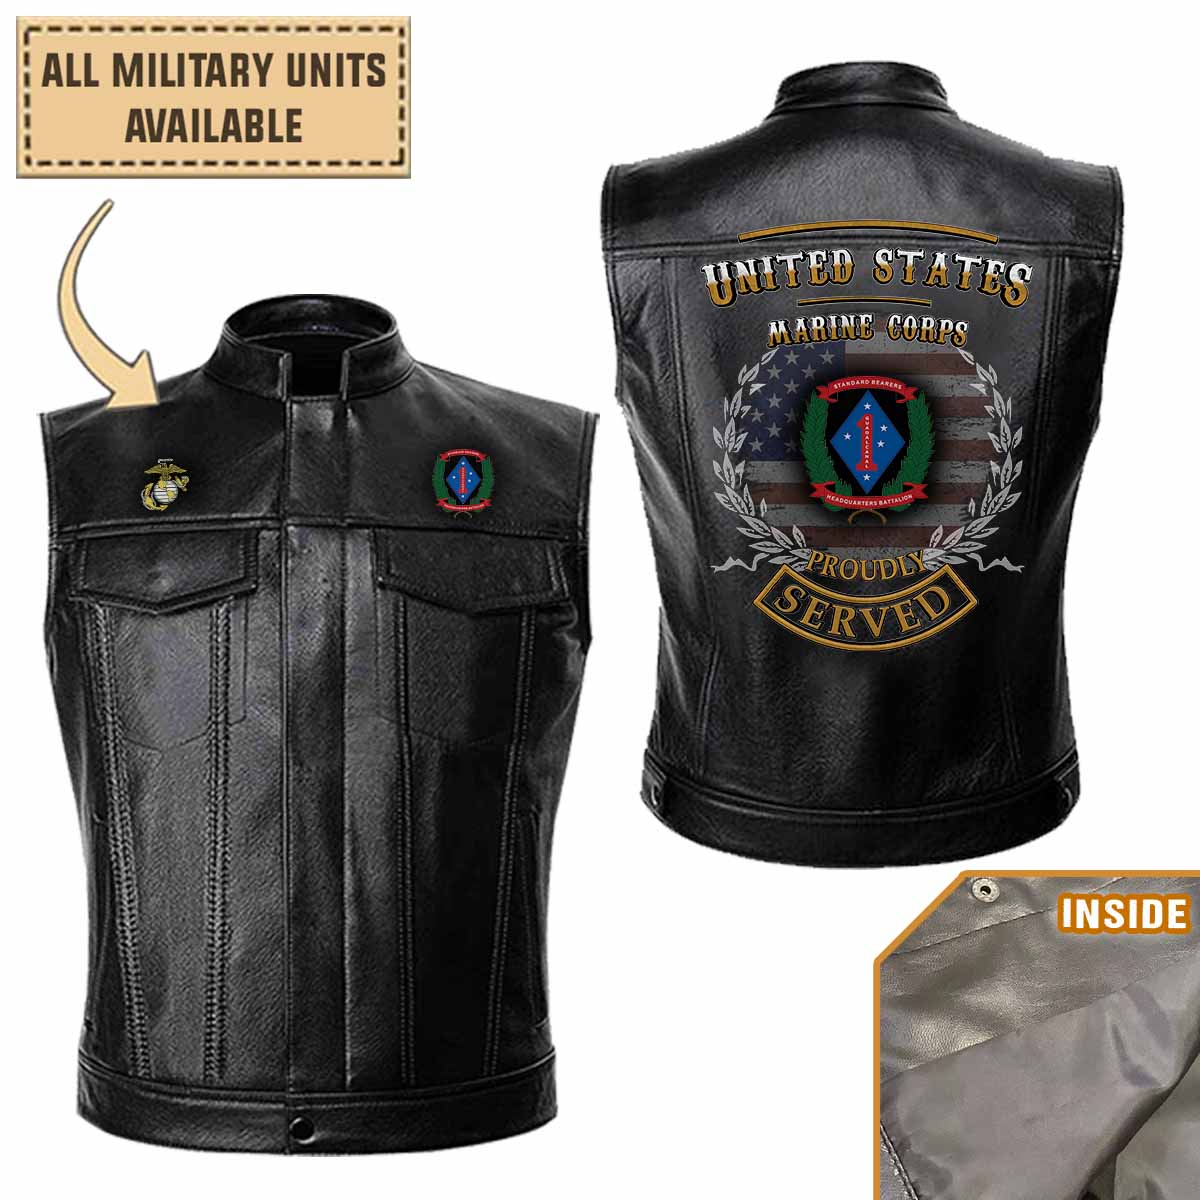 Headquarters Battalion 1st Marine Division_Military Leather Jacket and Vest